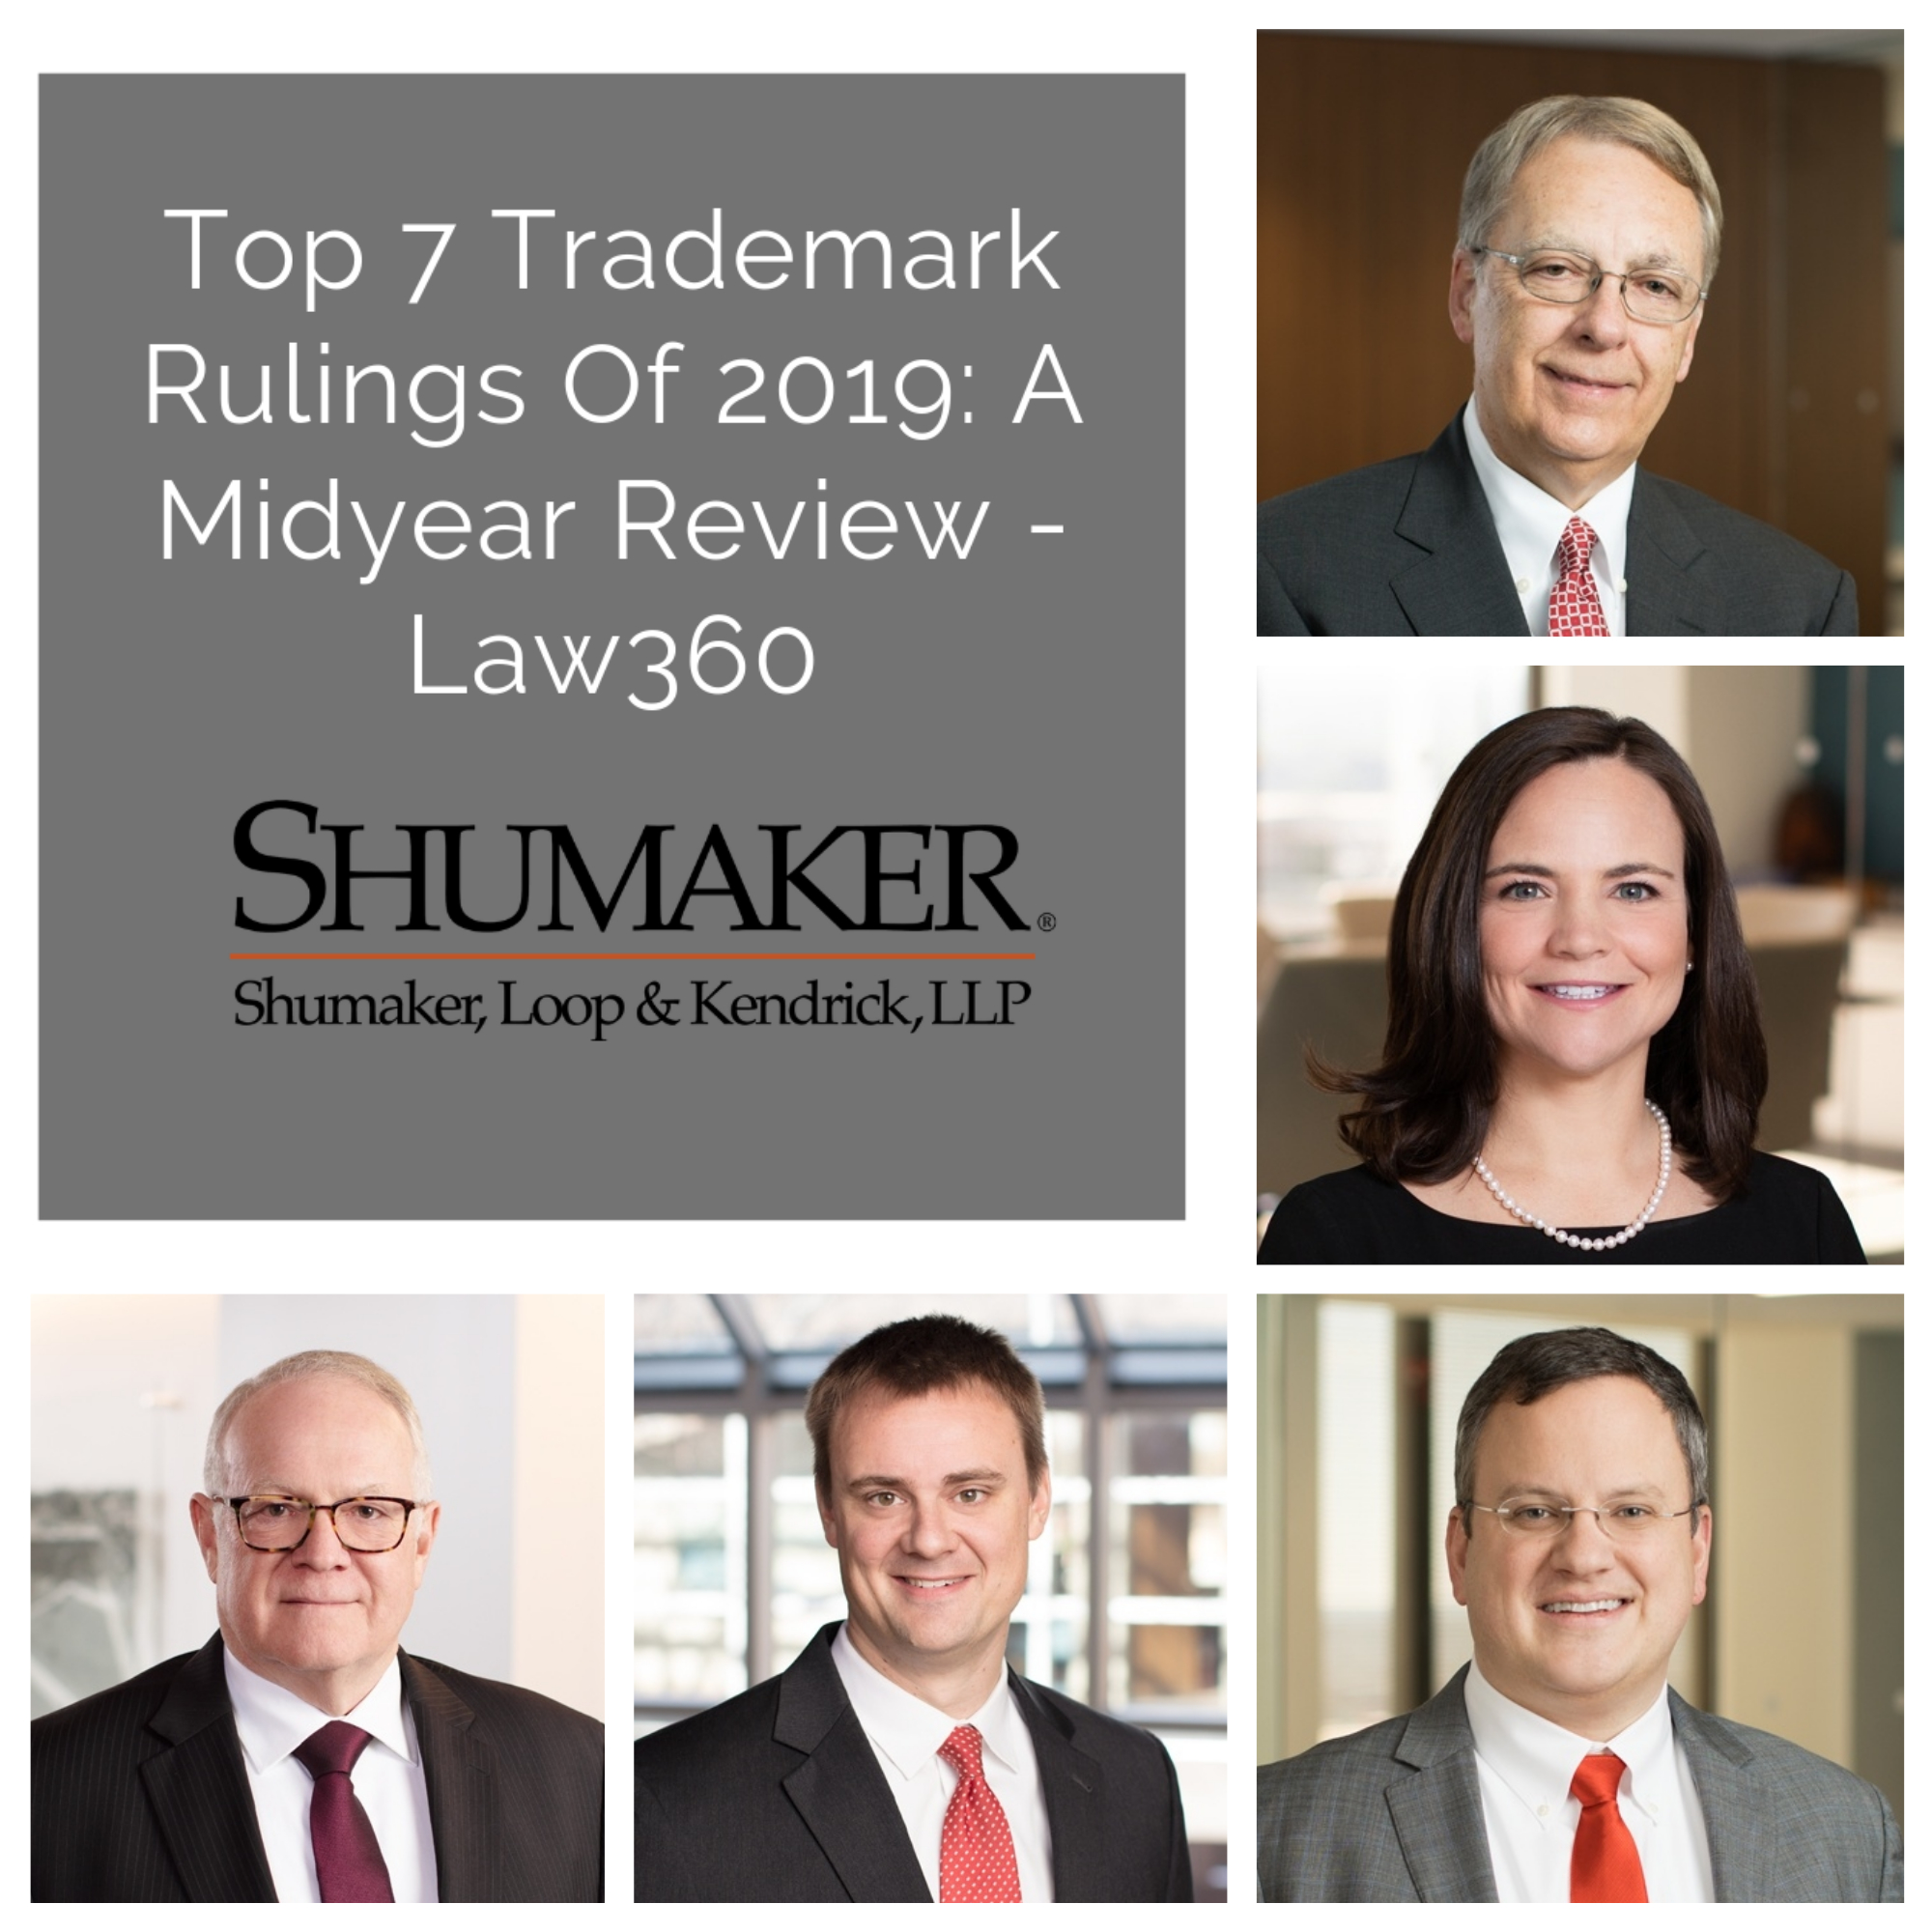 Shumaker Earns 2 of Top 7 Trademark Rulings in Law360’s Midyear Review